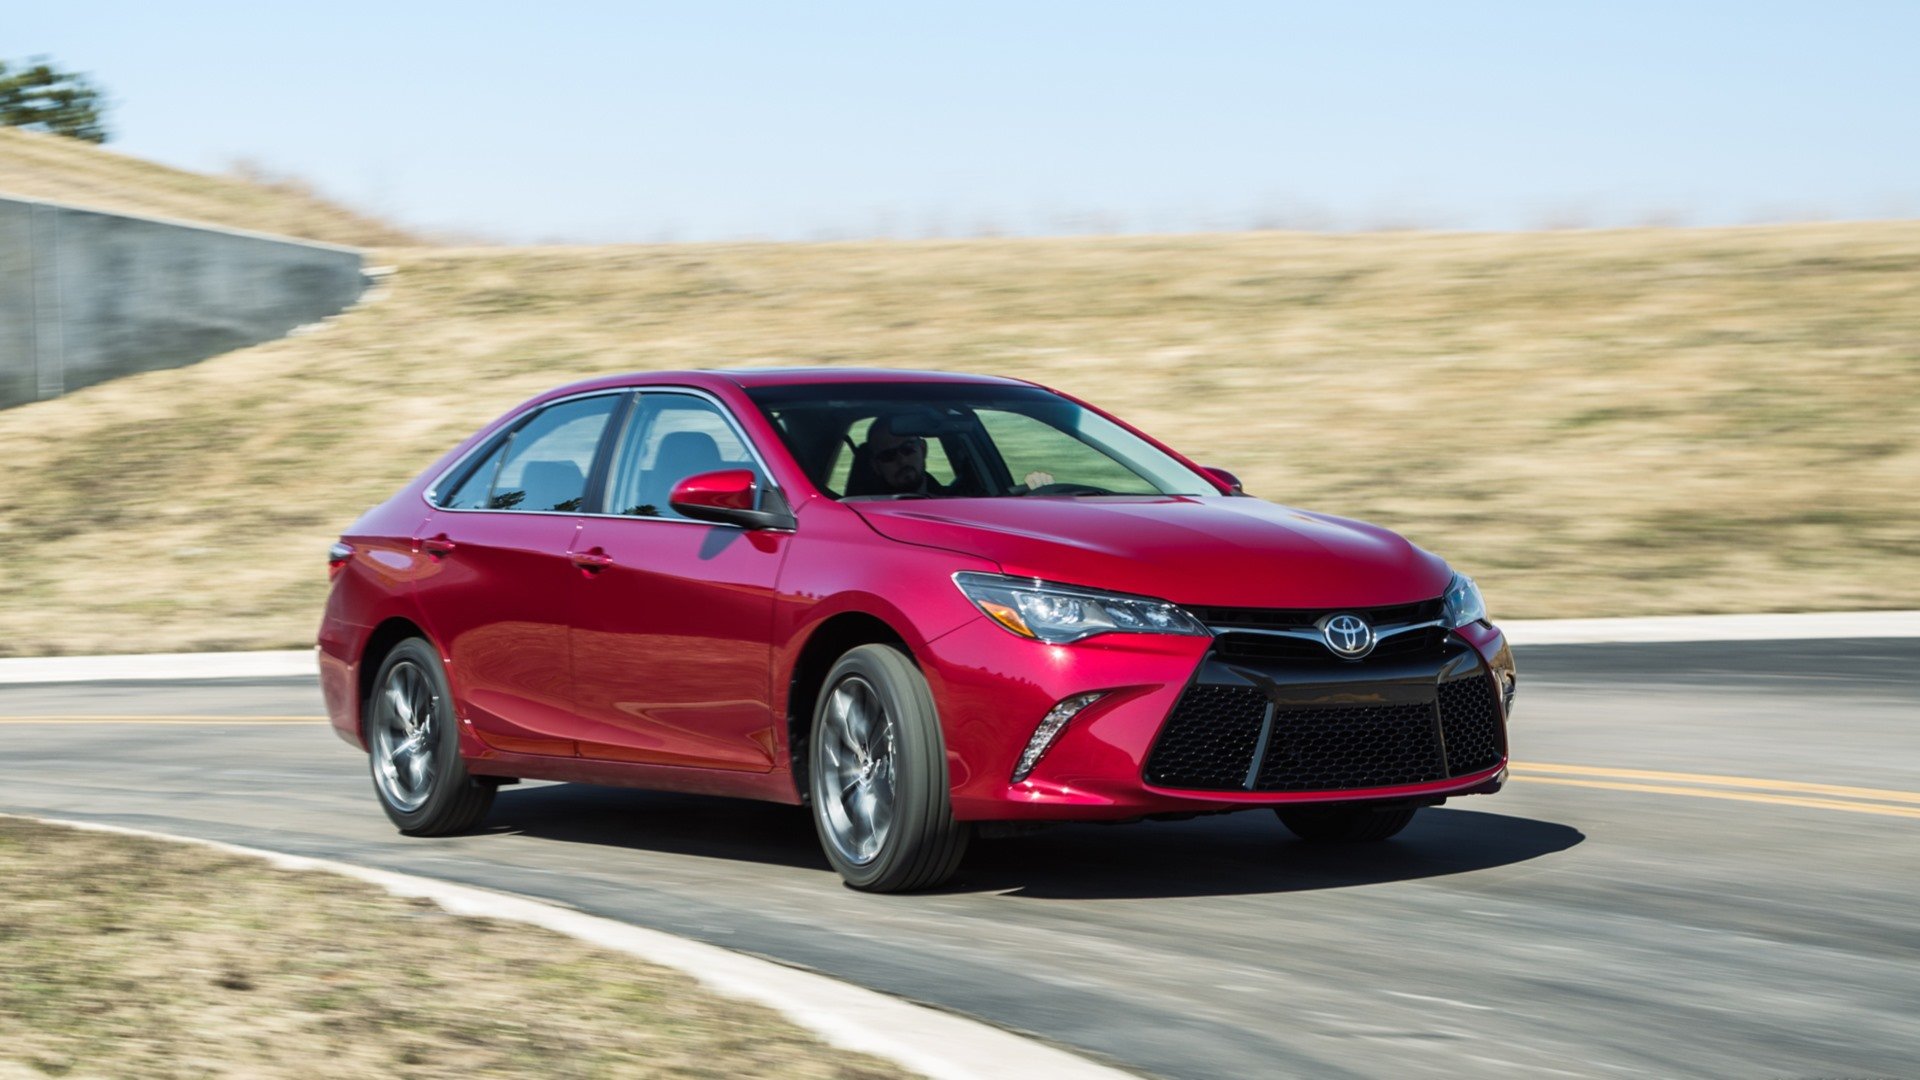 Best Toyota Camry wallpaper ID:342118 for High Resolution full hd computer